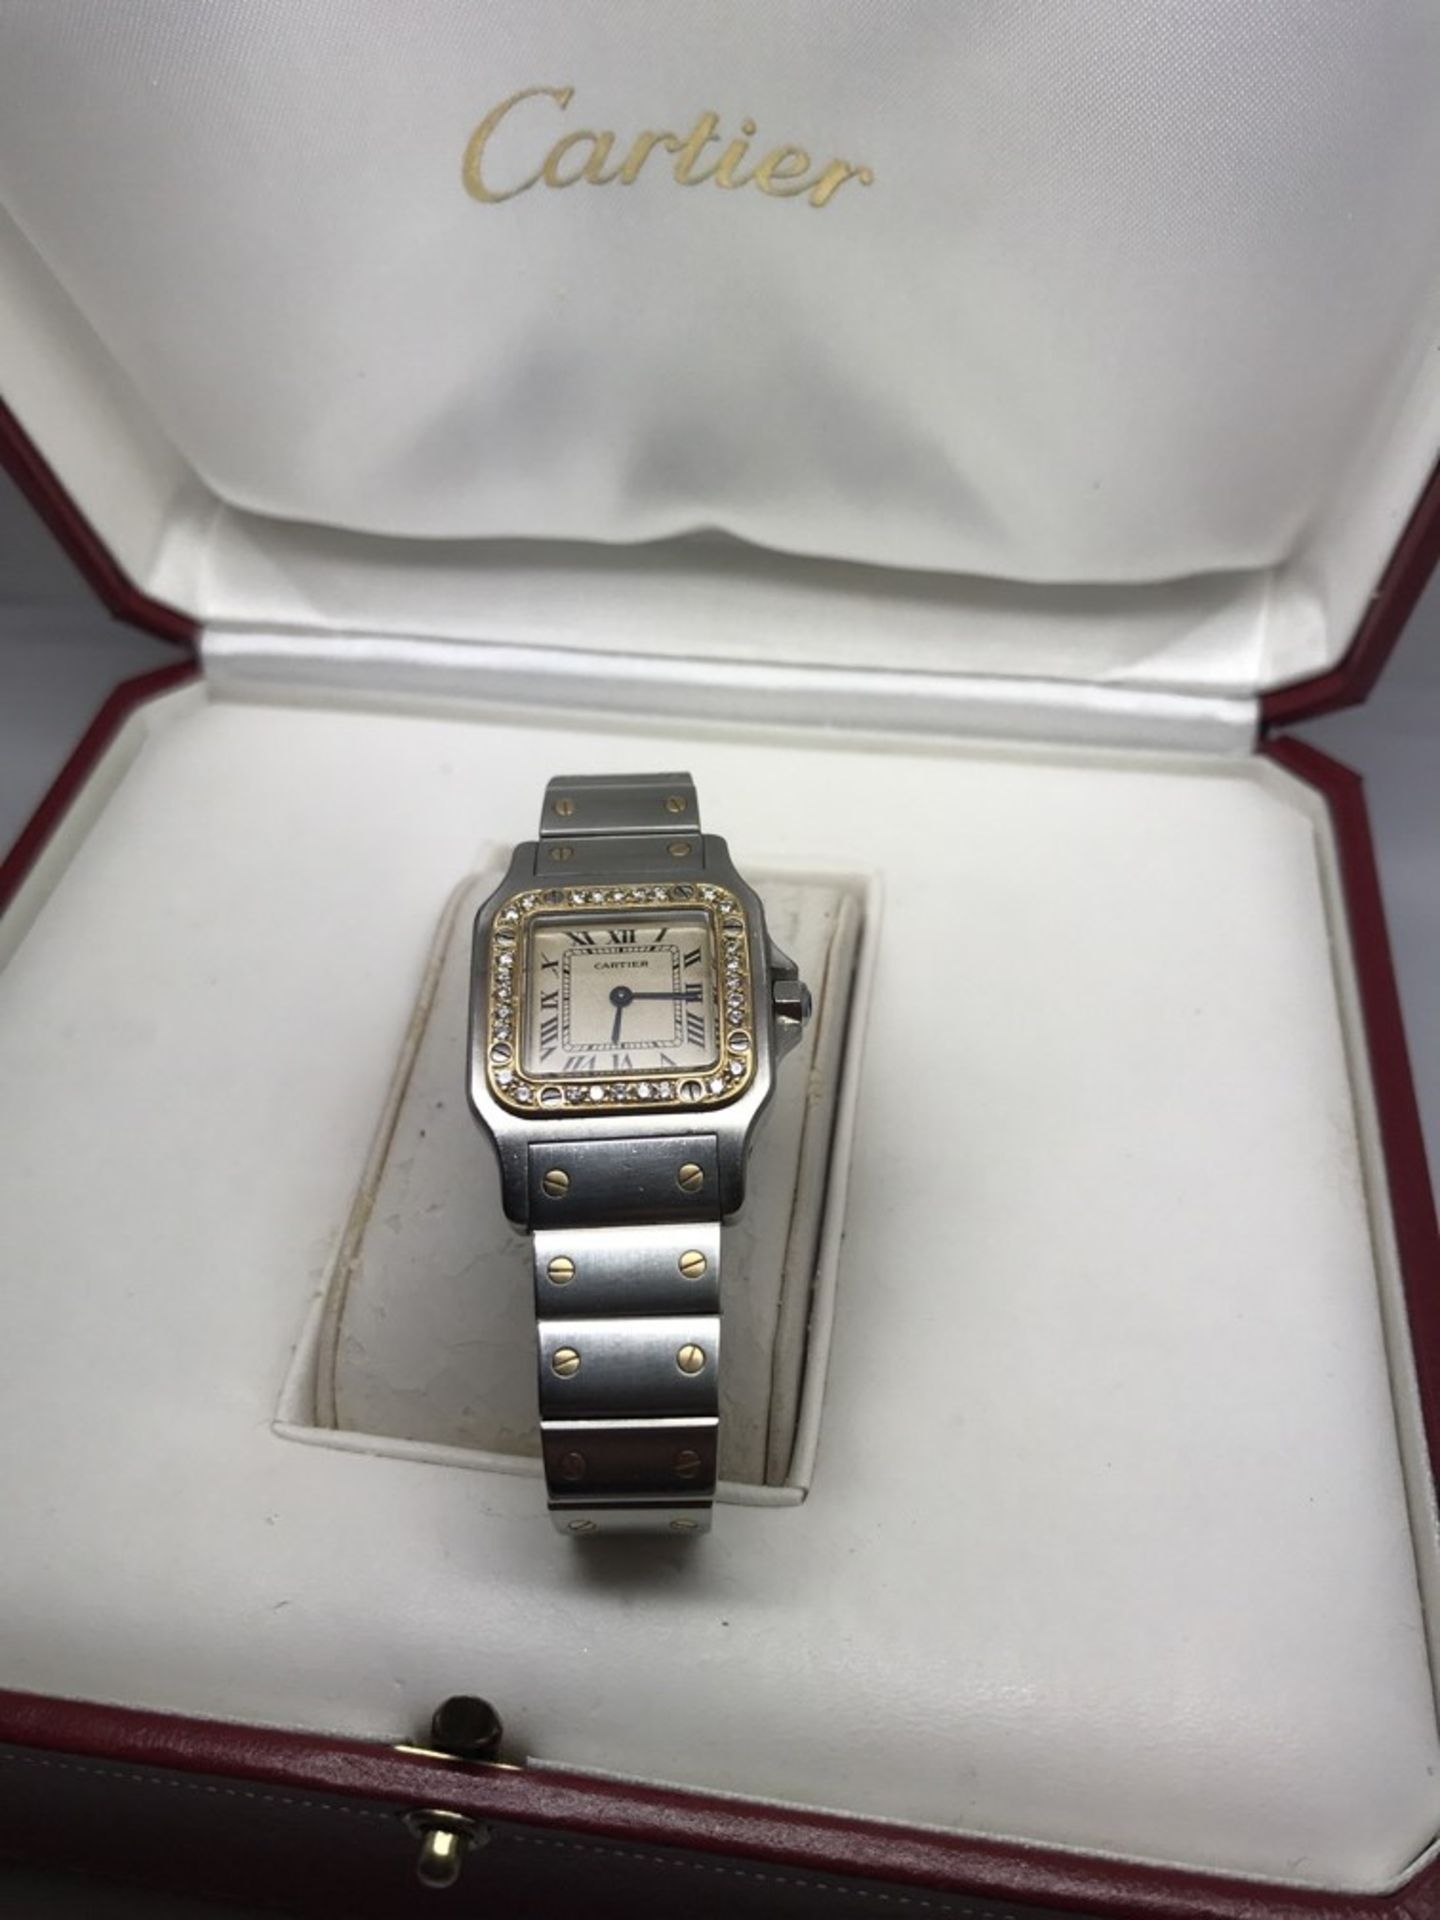 CARTIER GOLD & STAINLESS/STEEL DIAMOND SET WATCH WITH CARTIER BOX - Image 2 of 6